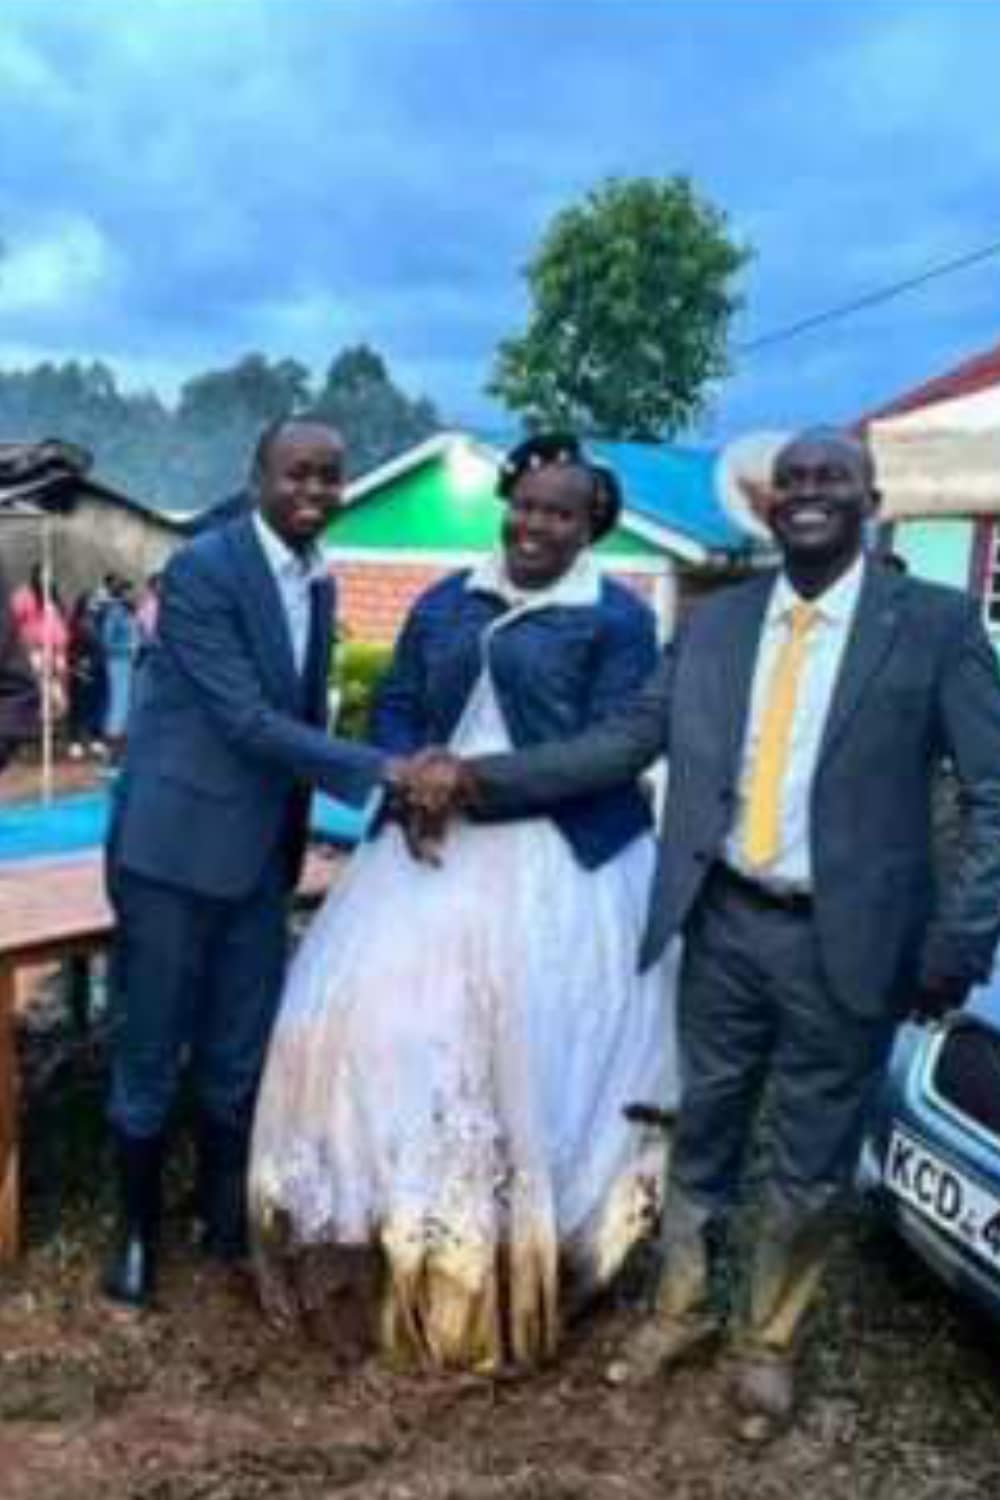 "For Better, for Worse" - Newlywed couple defies heavy rains celebrate special day amid challenging weather conditions